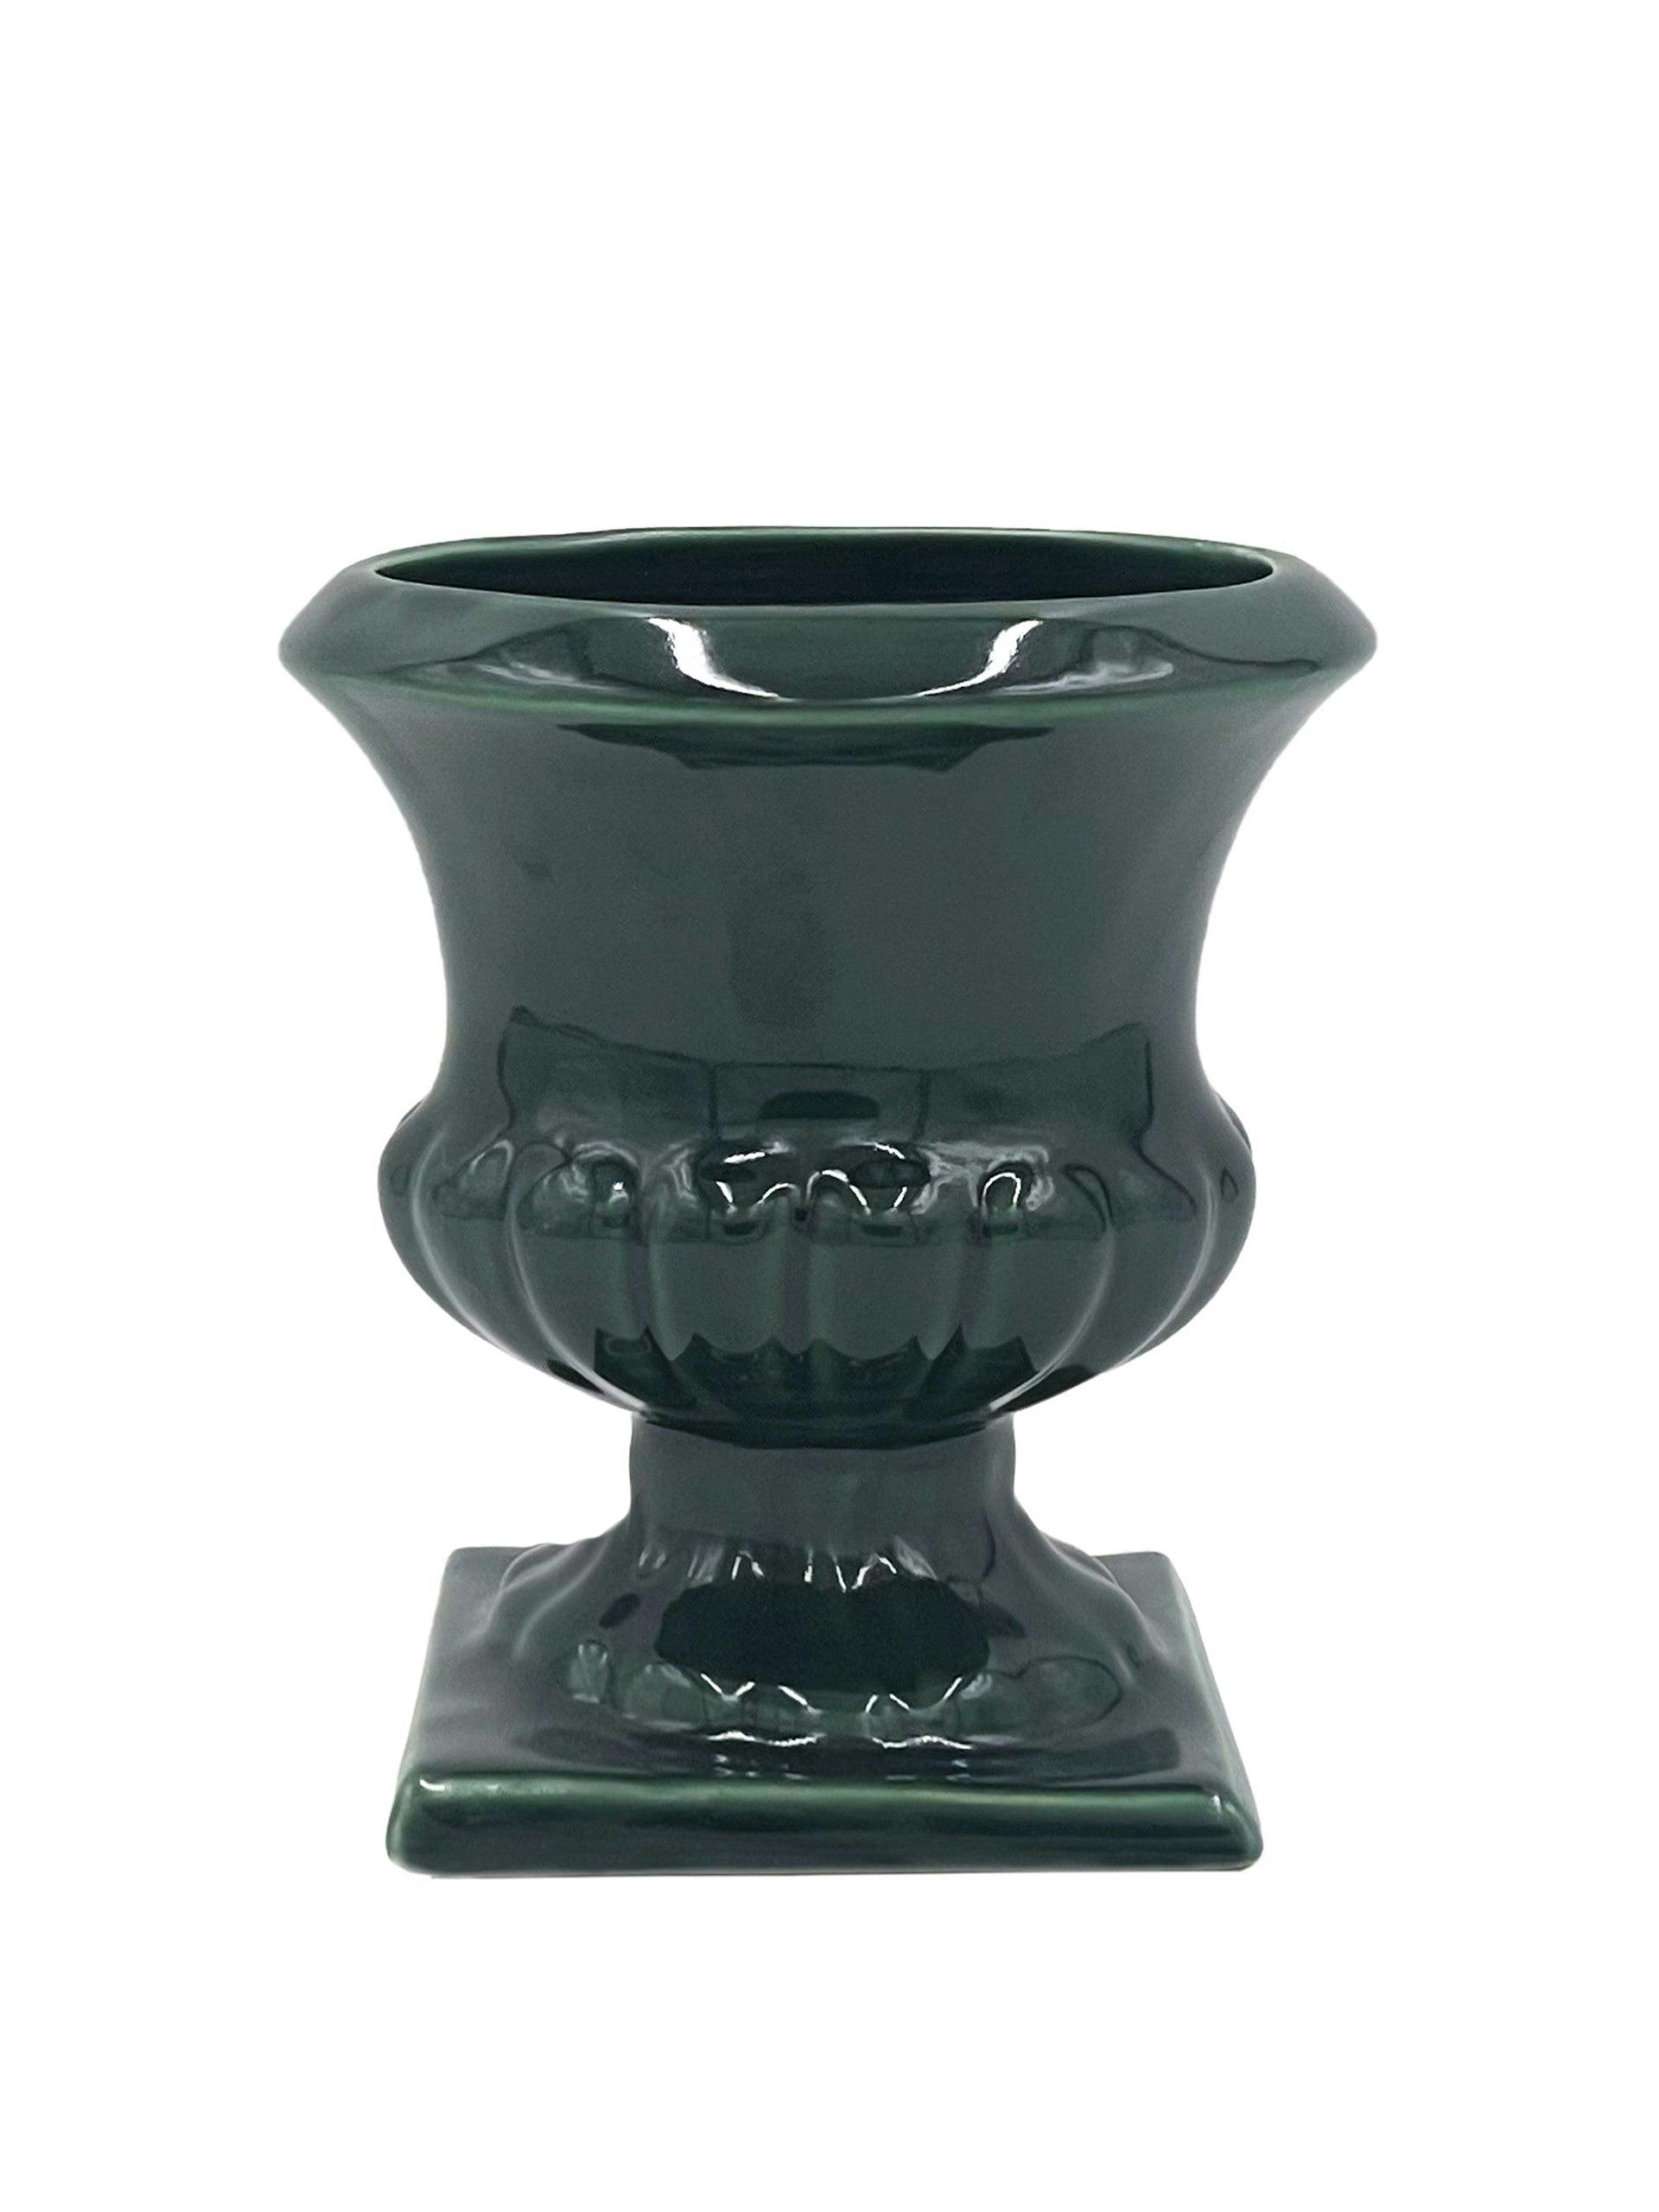 Fluted vase in emerald green